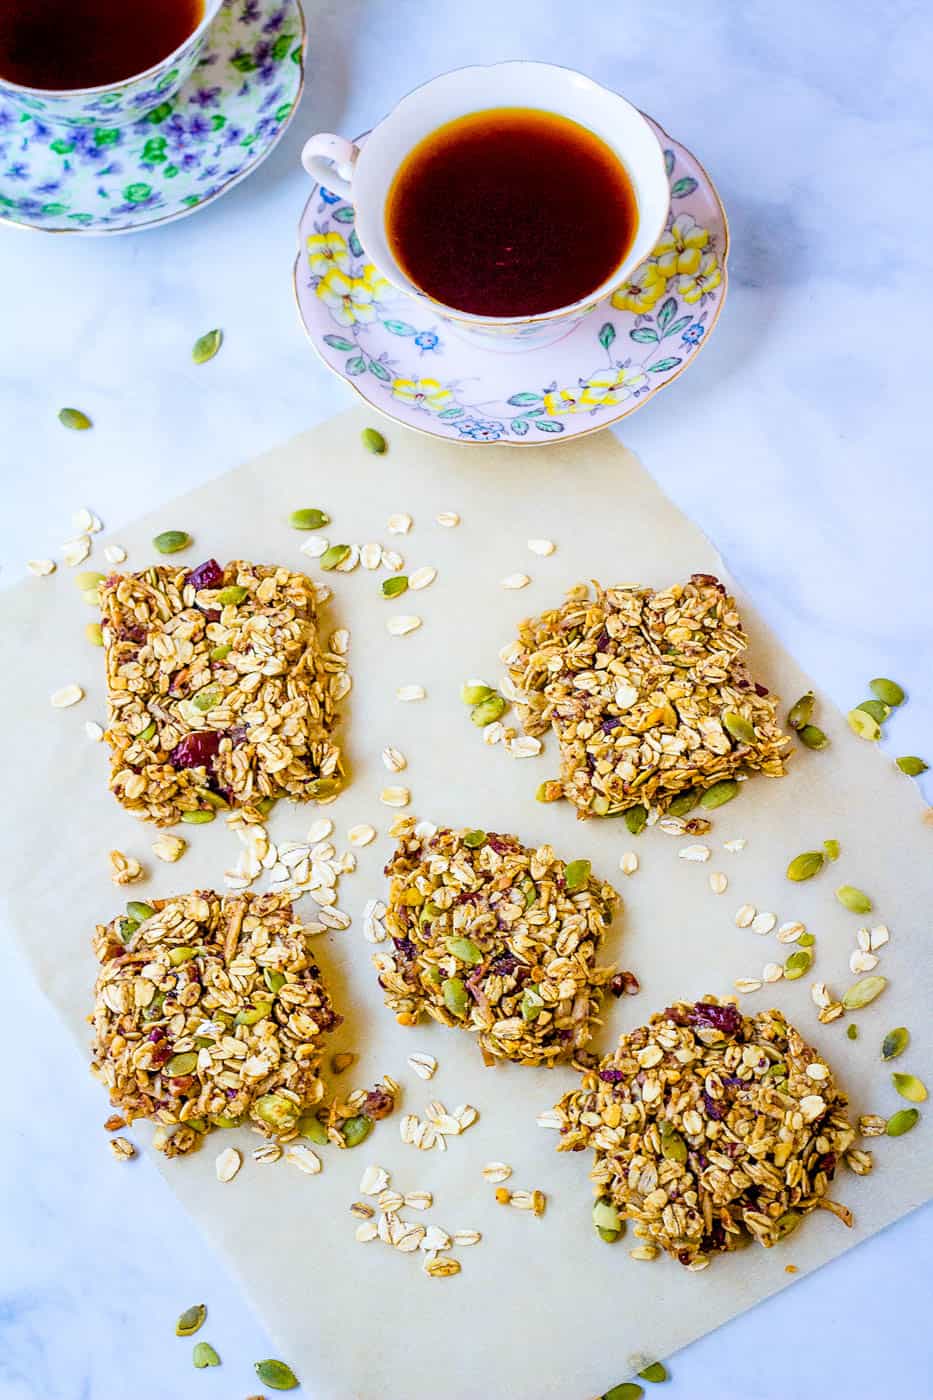 homemade healthy flapjacks, cut into squares and pictured on a sheet of parchment paper